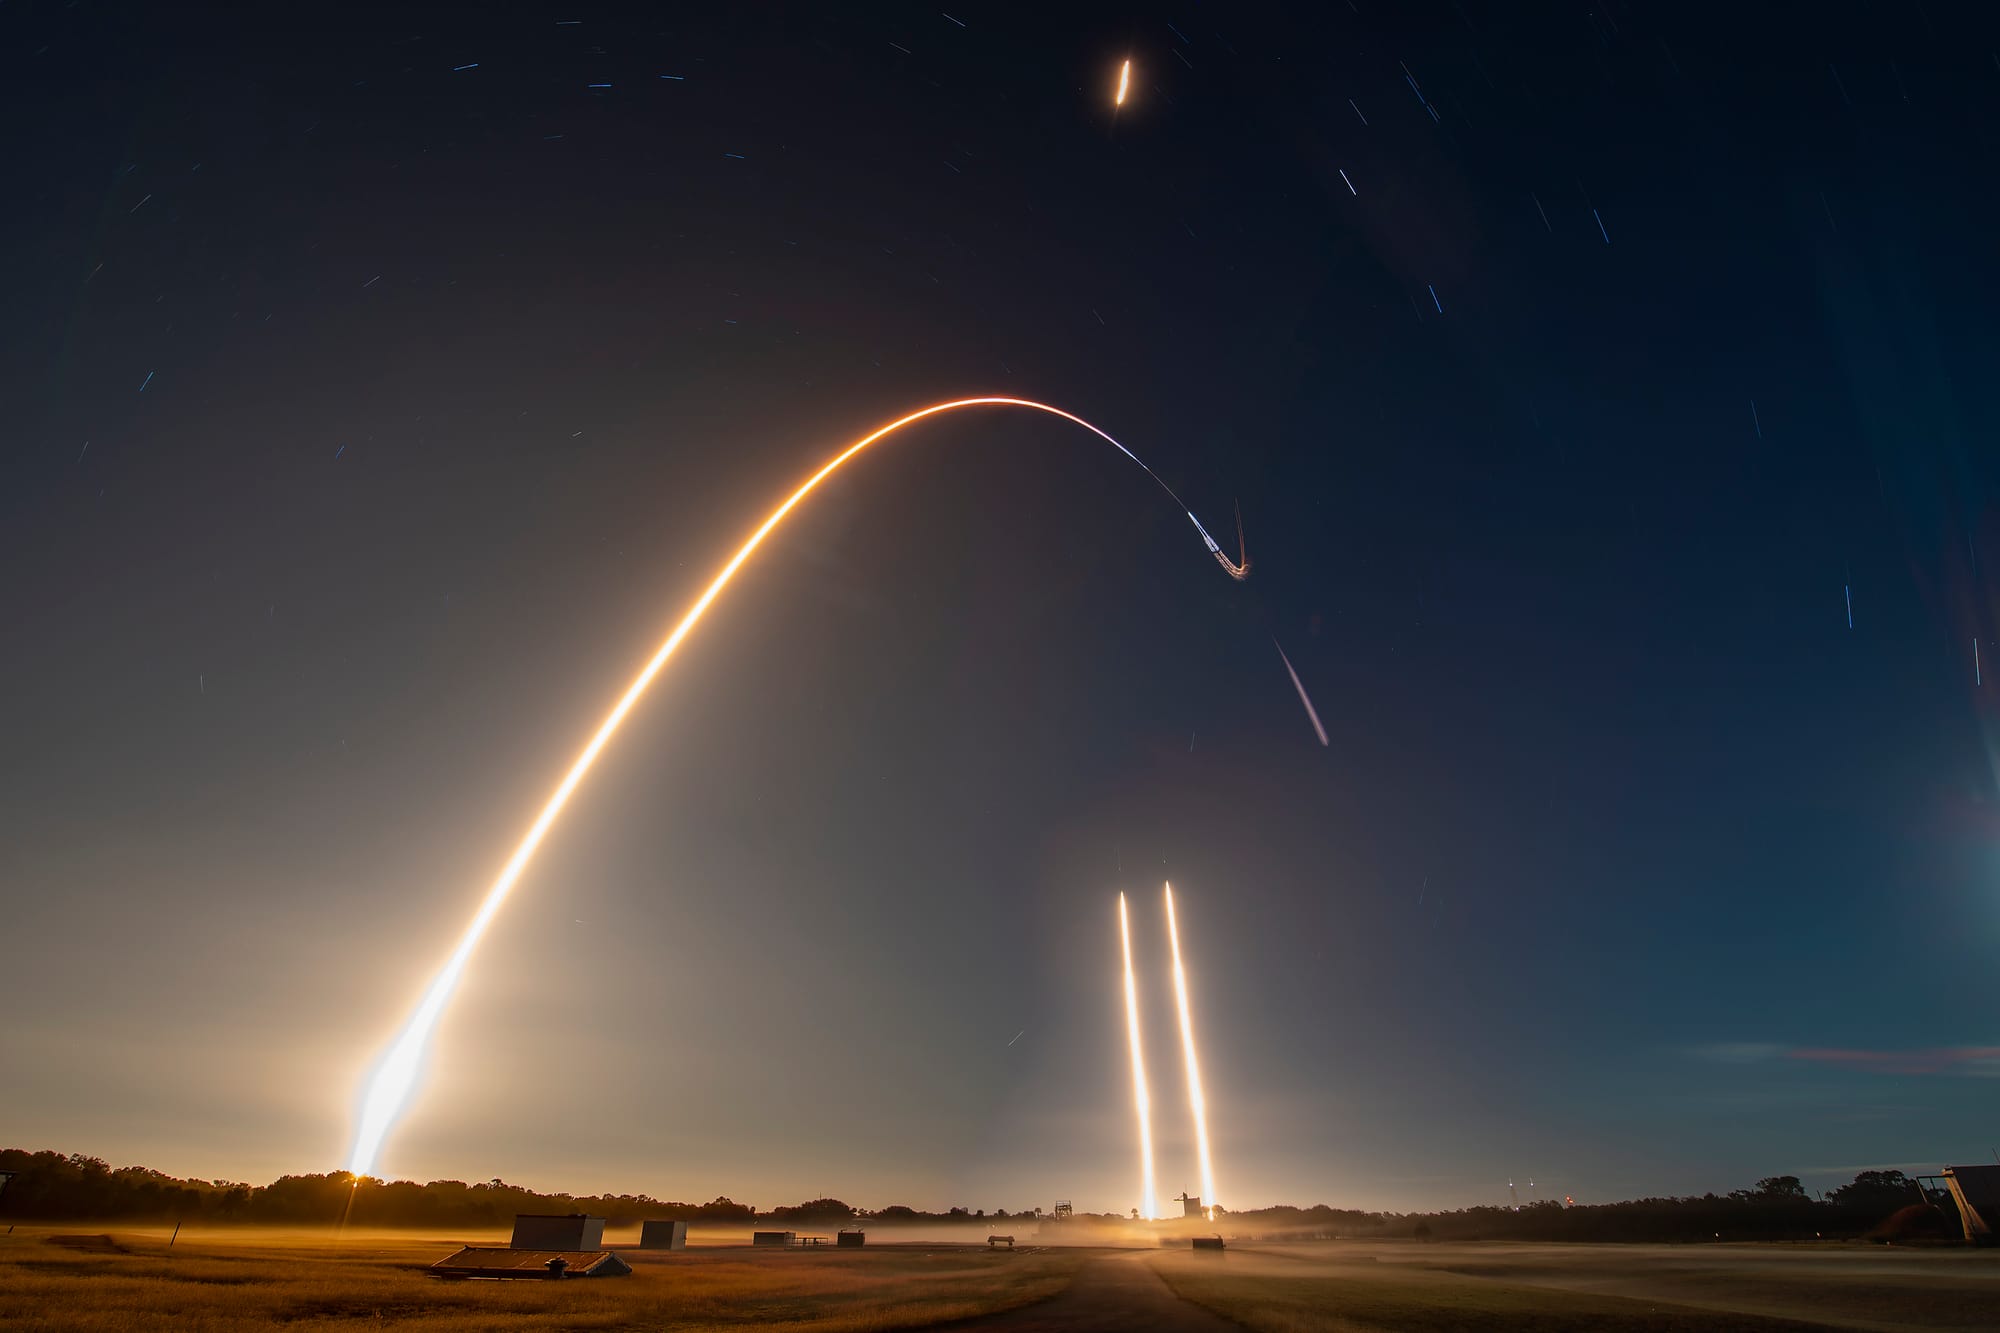 A long exposure shot of the OTV-7/USSF-52 mission from Cape Canaveral, Florida. ©SpaceX